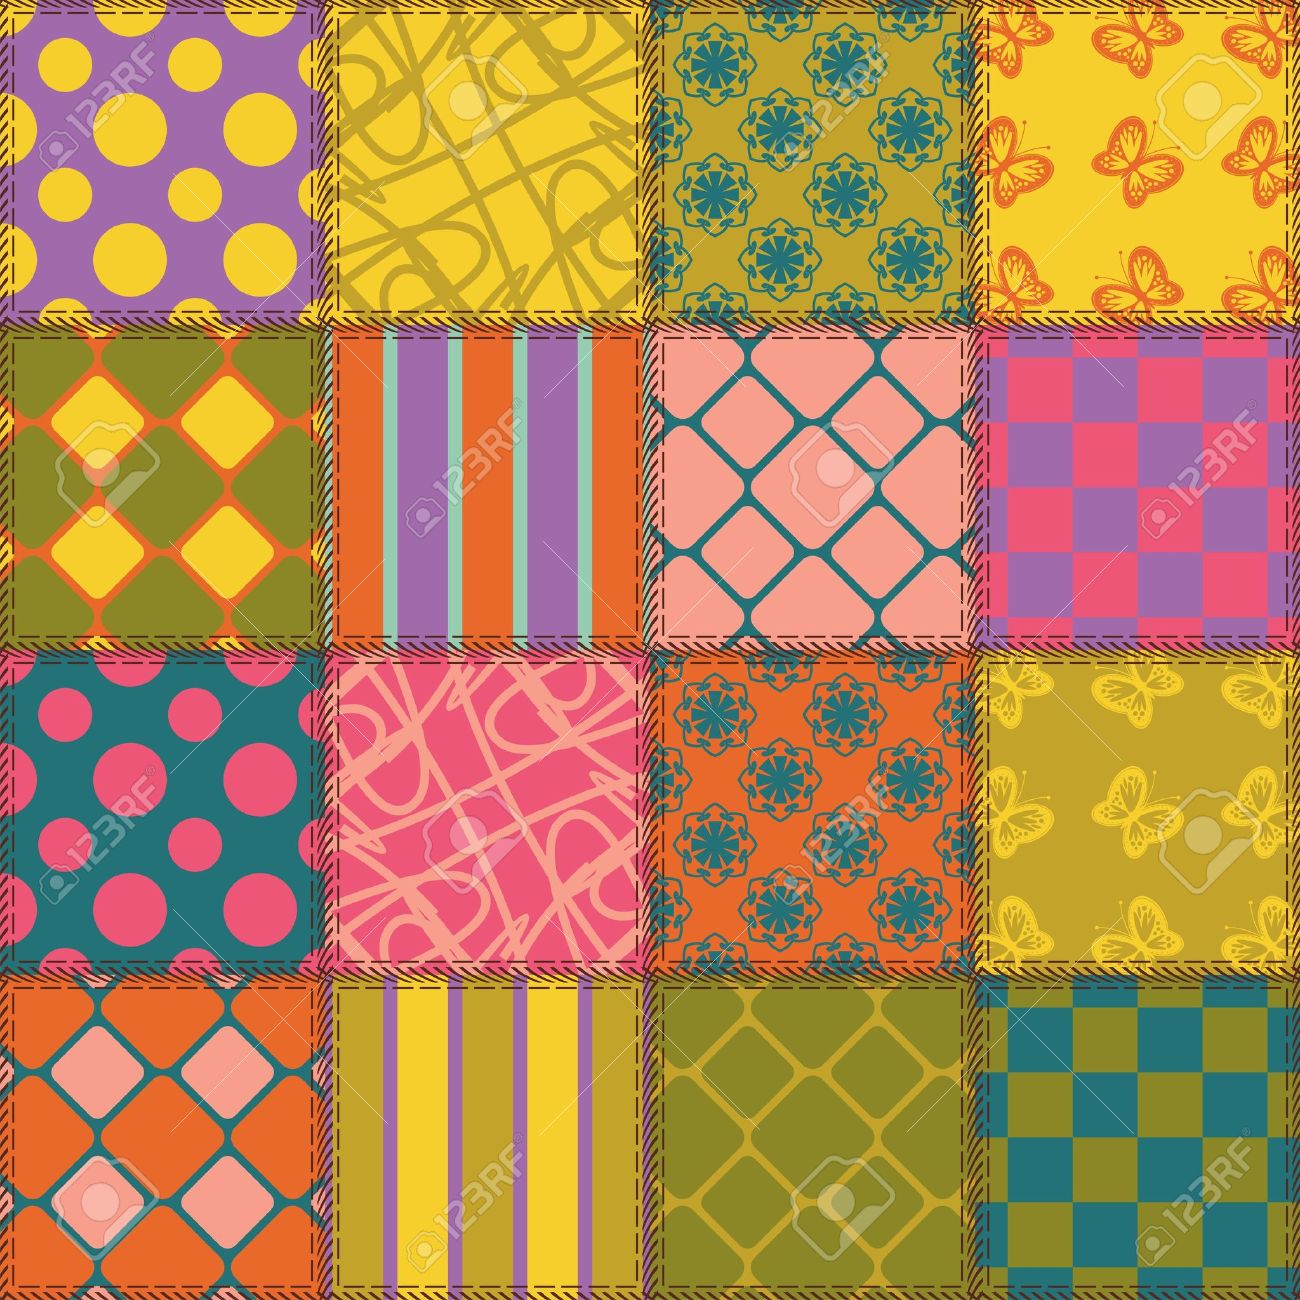 Patchwork Background With Different Patterns Royalty - Patchwork Pattern - HD Wallpaper 